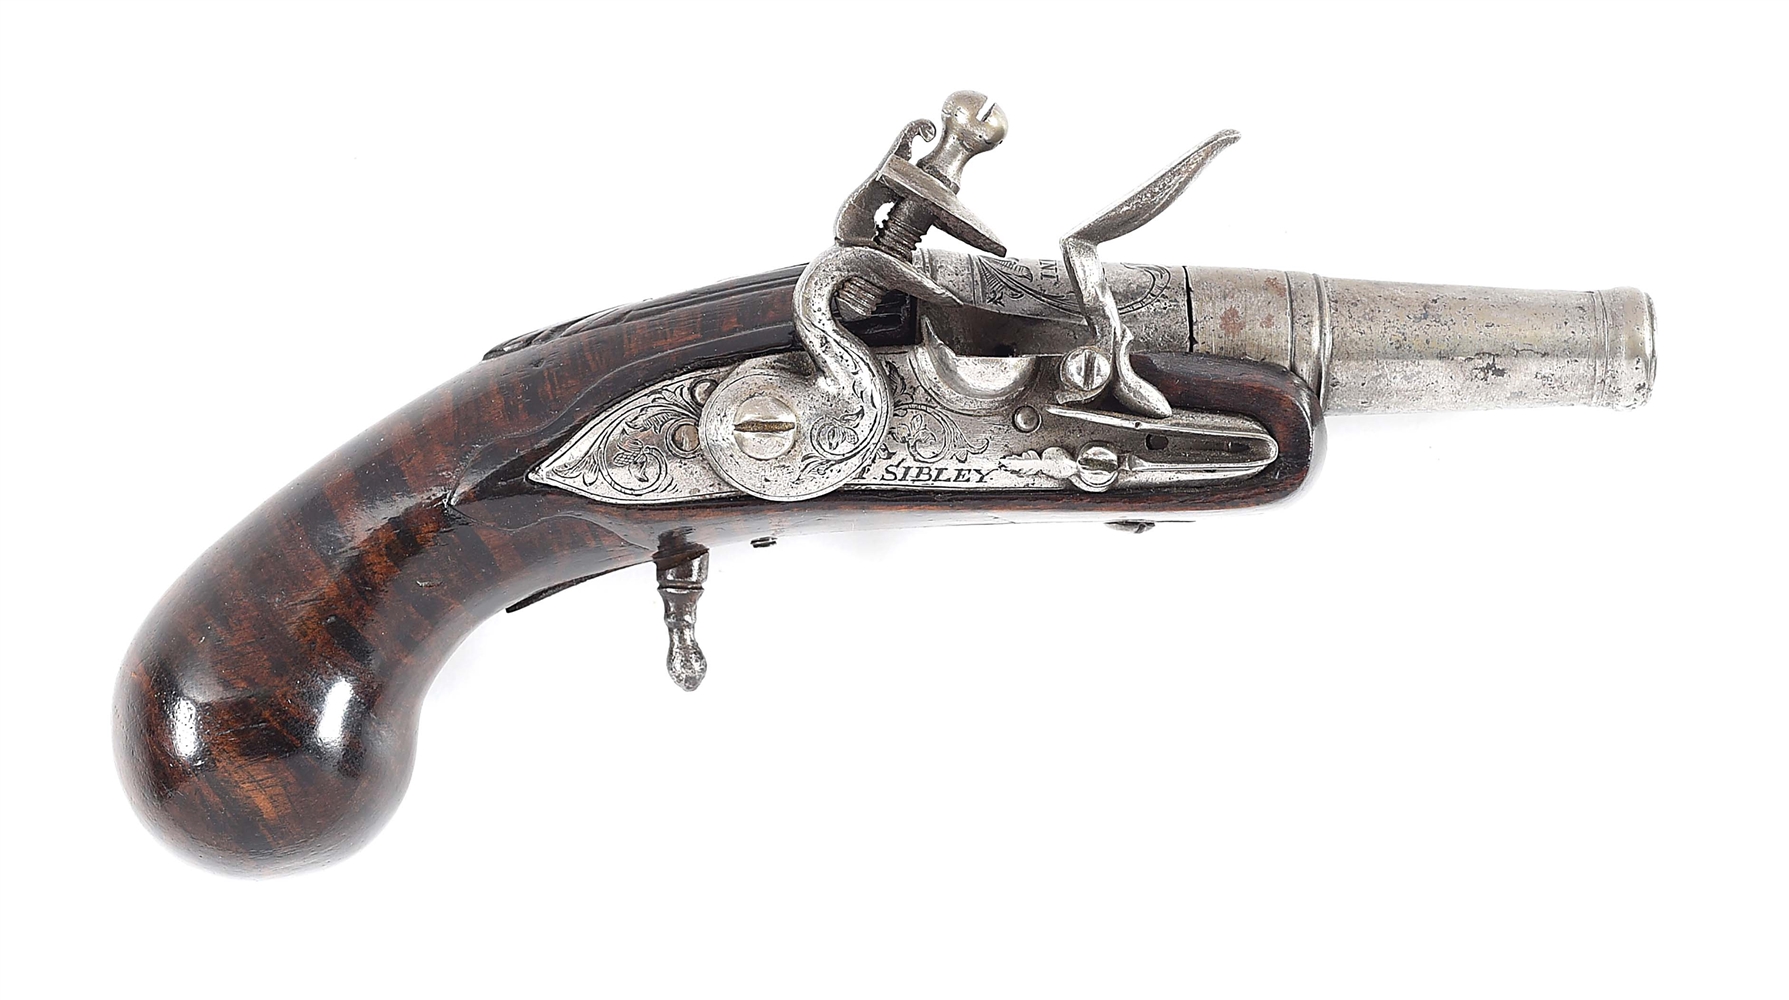 (A) EARLY ENGLISH FLINTLOCK POCKET PISTOL BY SIBLEY WITH DISPLAY STAND.